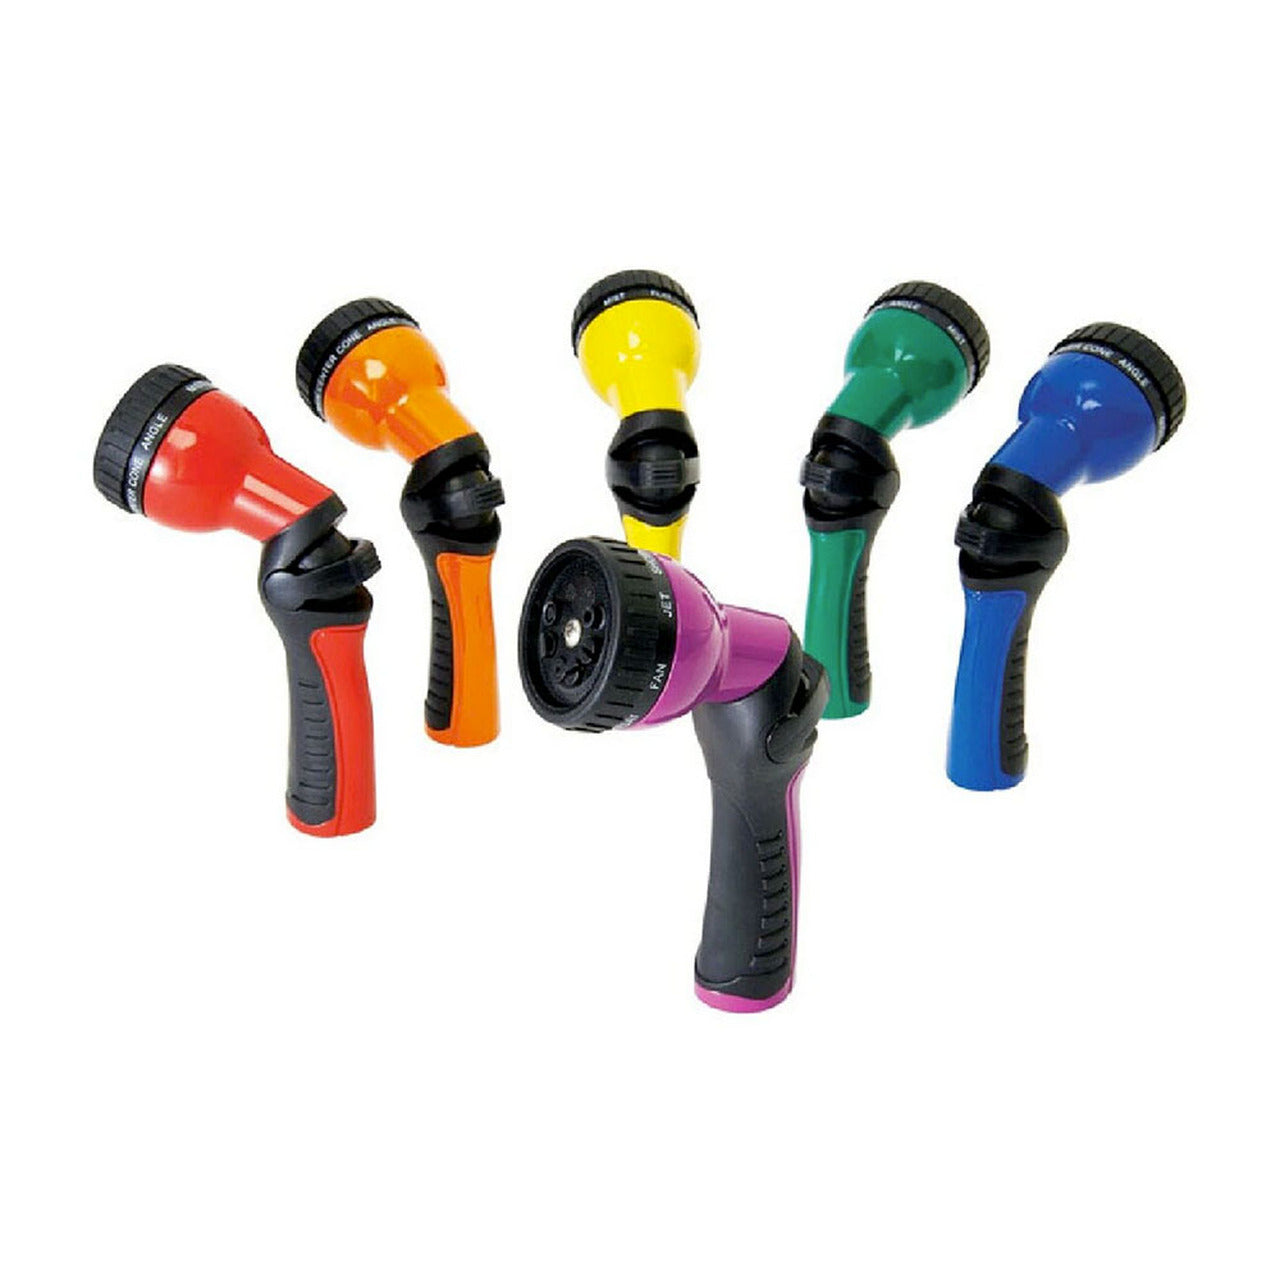 Spray gun hose attachments in 6 available colors (red, orange, yellow, green, blue, and purple).